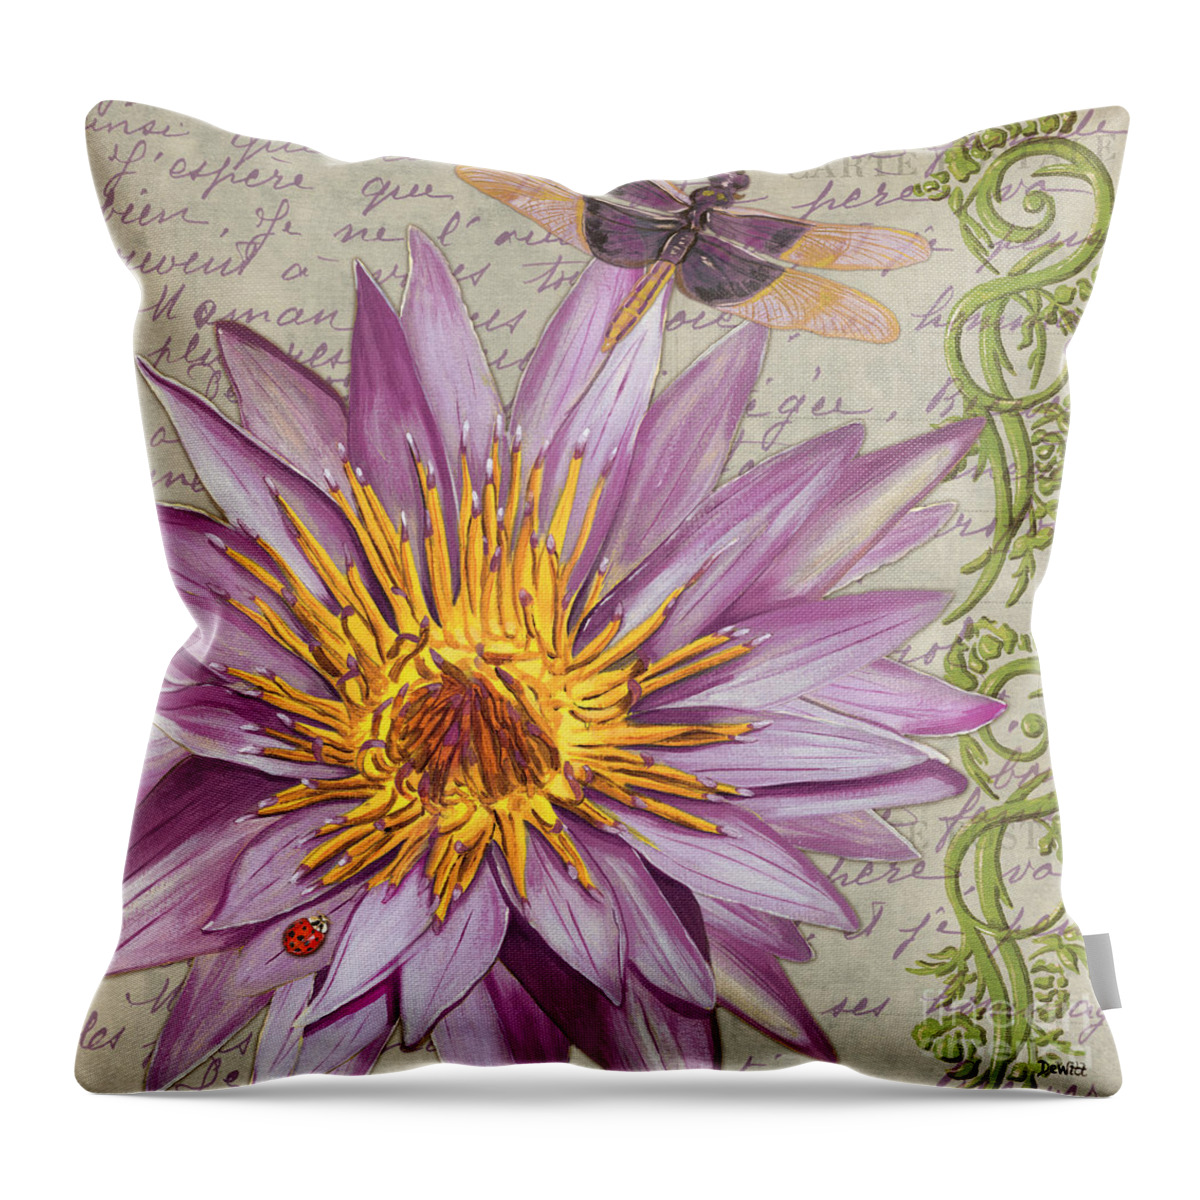 Floral Throw Pillow featuring the painting Moulin Floral 1 by Debbie DeWitt